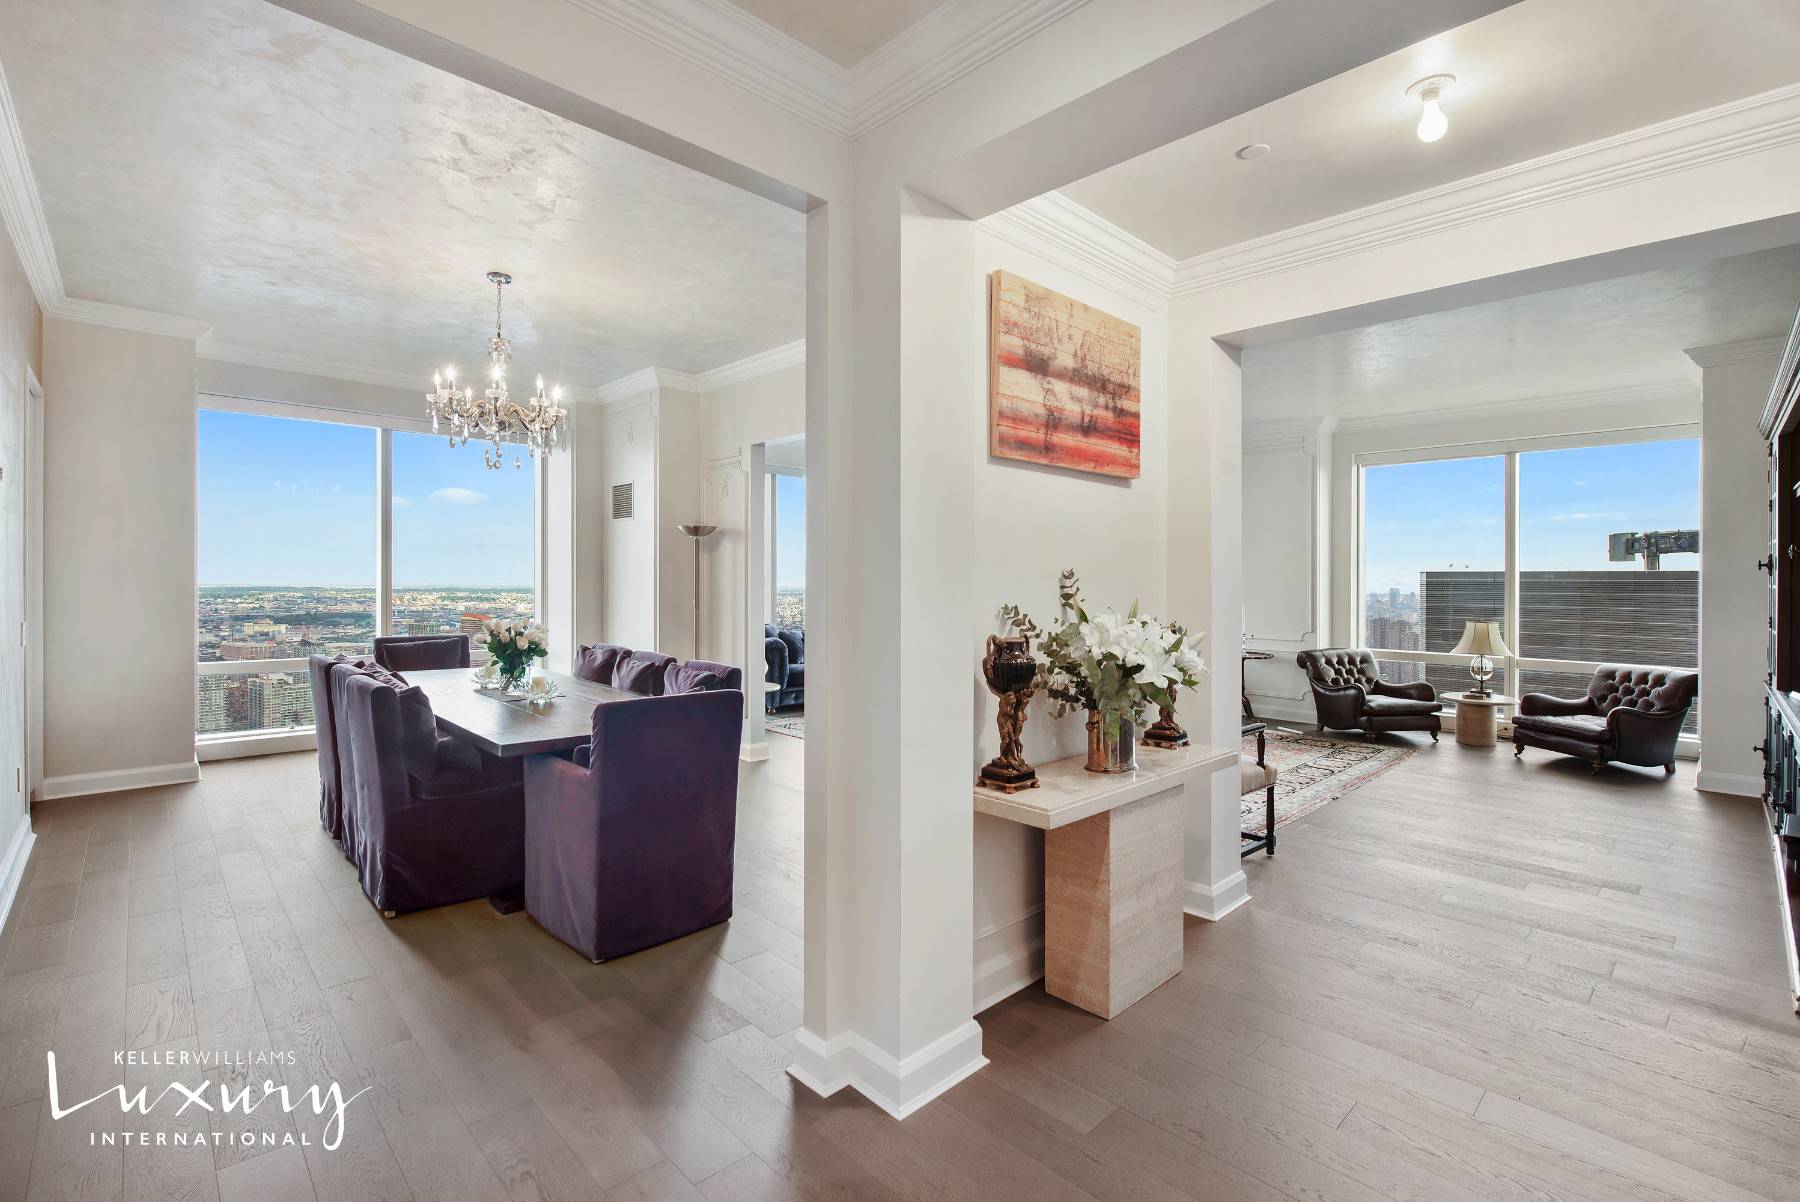 Breathtaking City and East River views abound from this spacious 3 bedroom, 3.